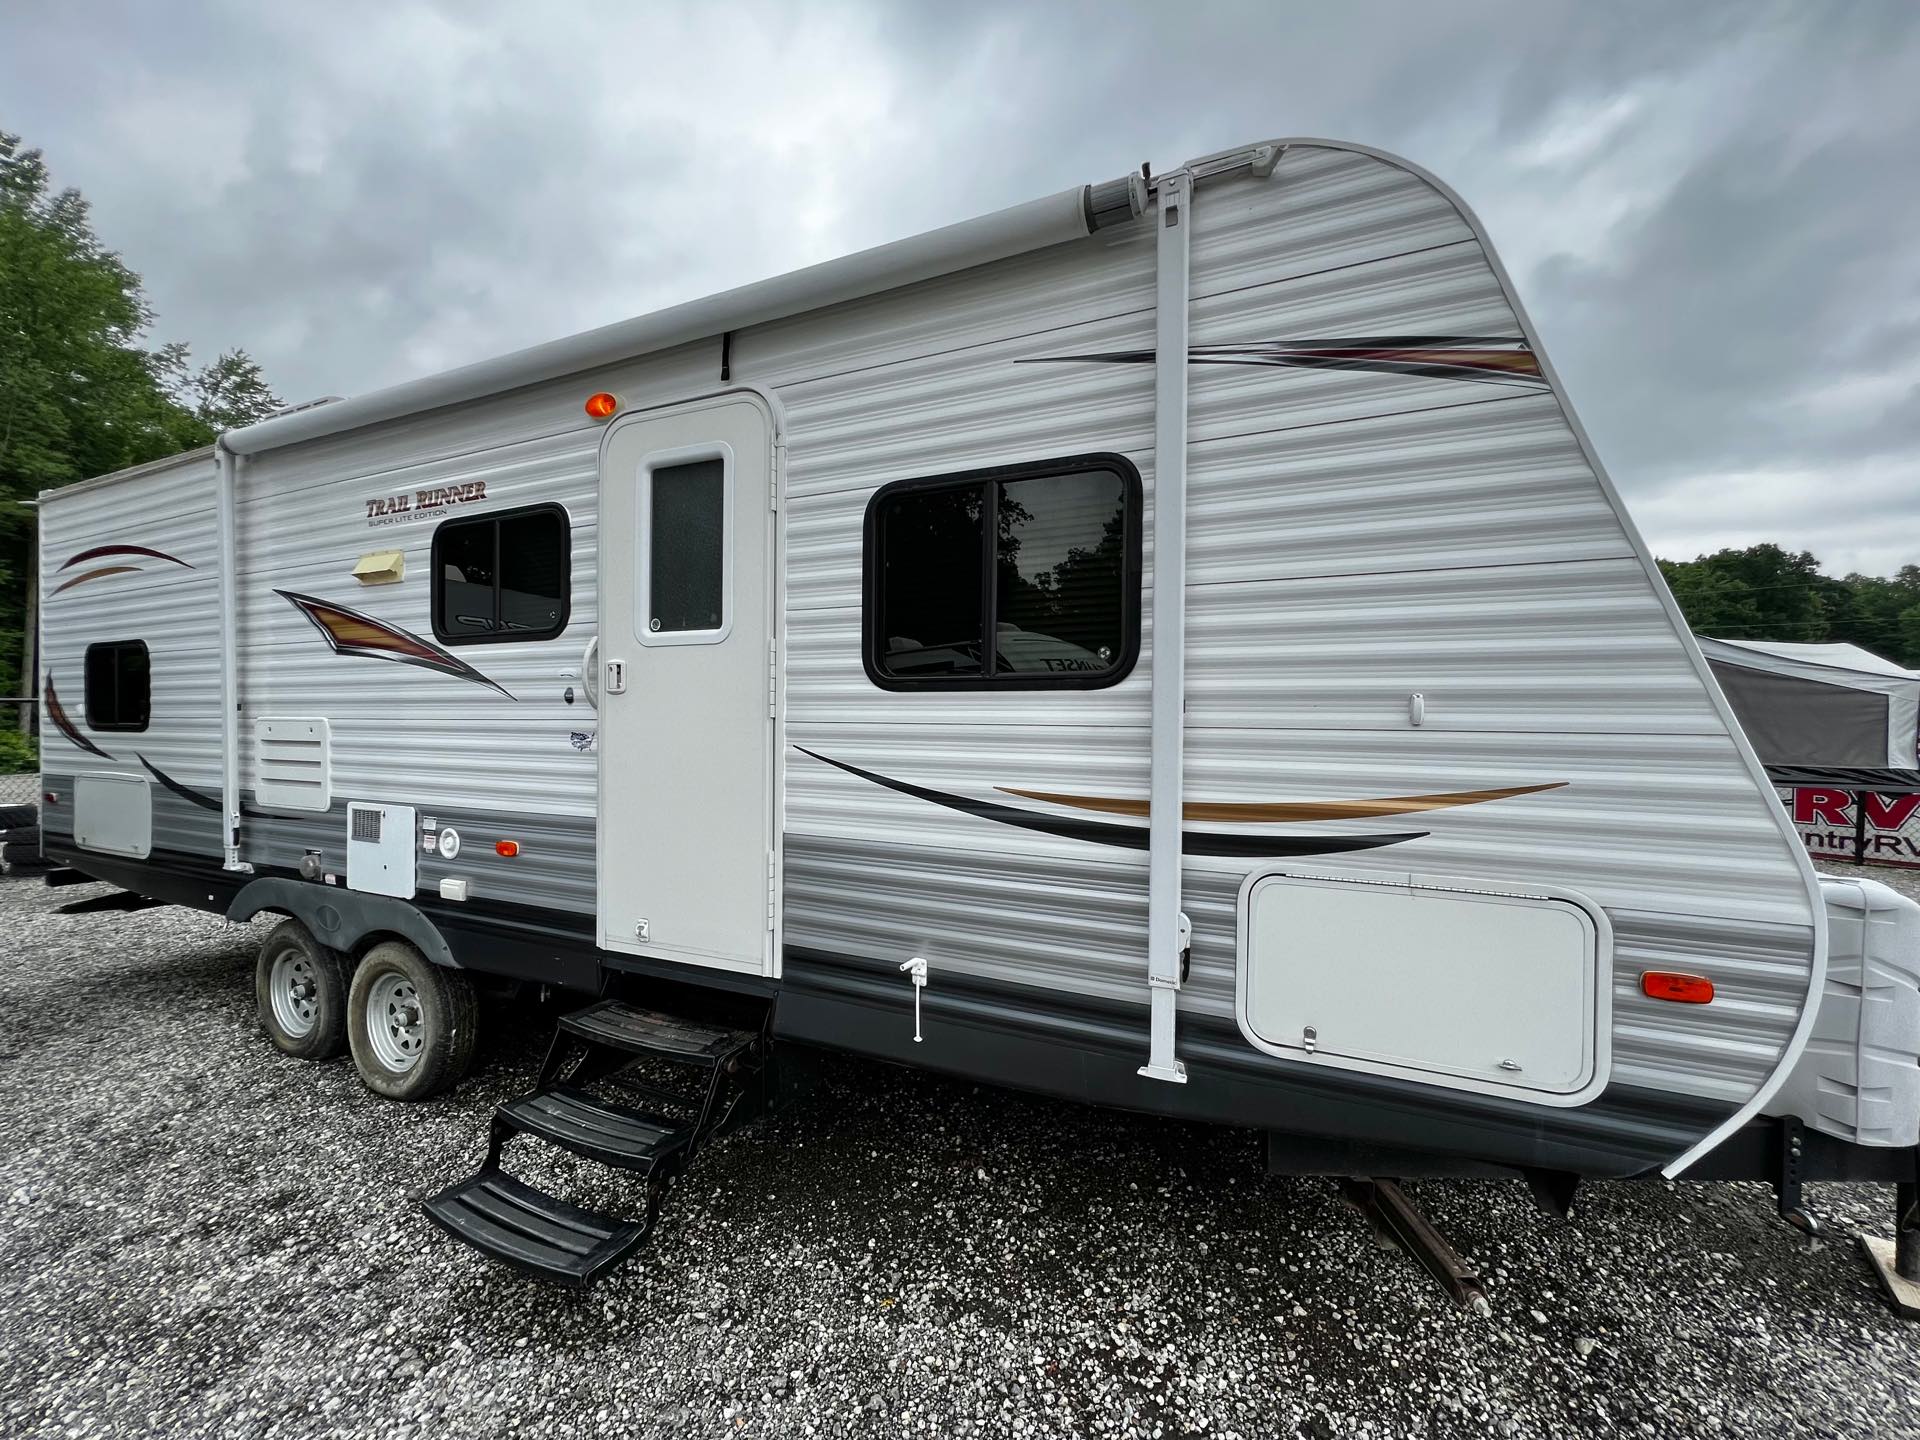 2013 Heartland Trail Runner SLE TR SLE 26 at Lee's Country RV